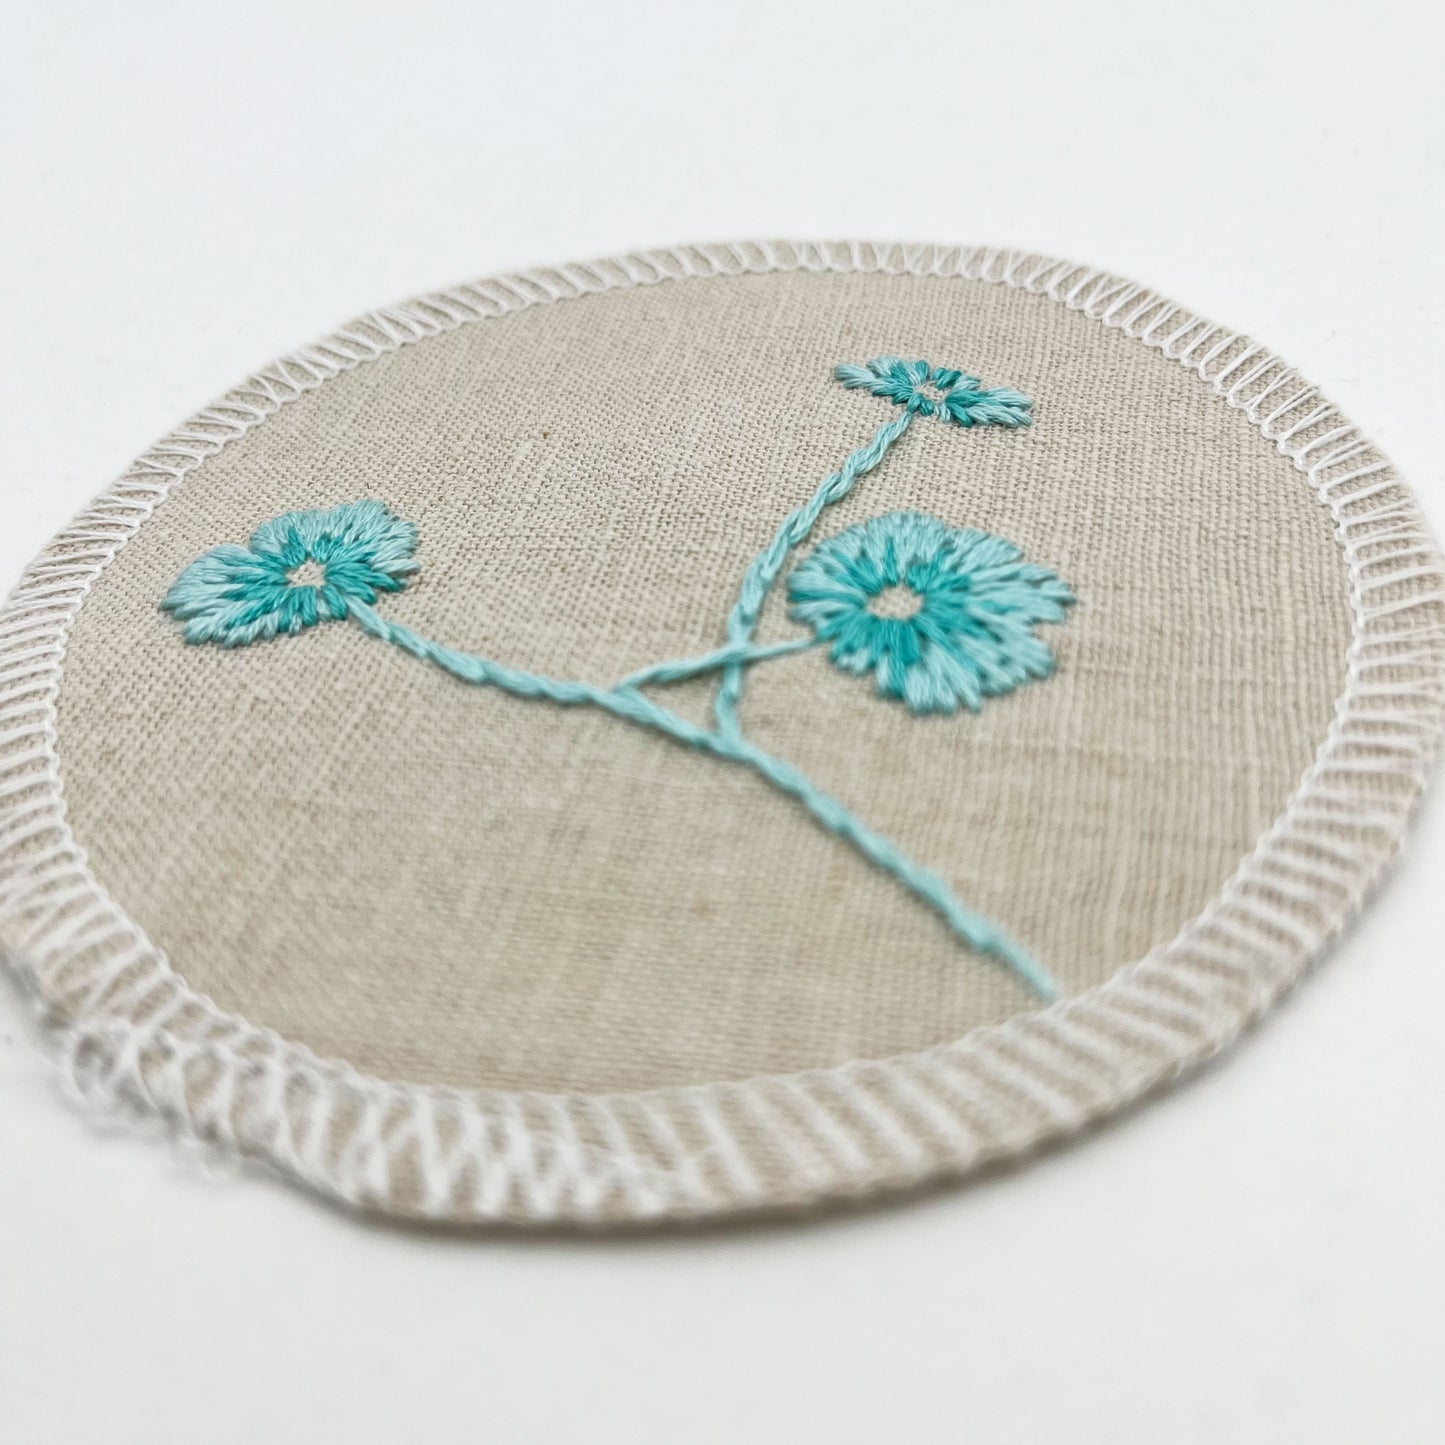 close up angled view of a circle shaped patch, made from a natural color linen fabric, hand embroidered with 3 poppies in shades of robin's egg blues, edges overlocked with white thread, on a white background